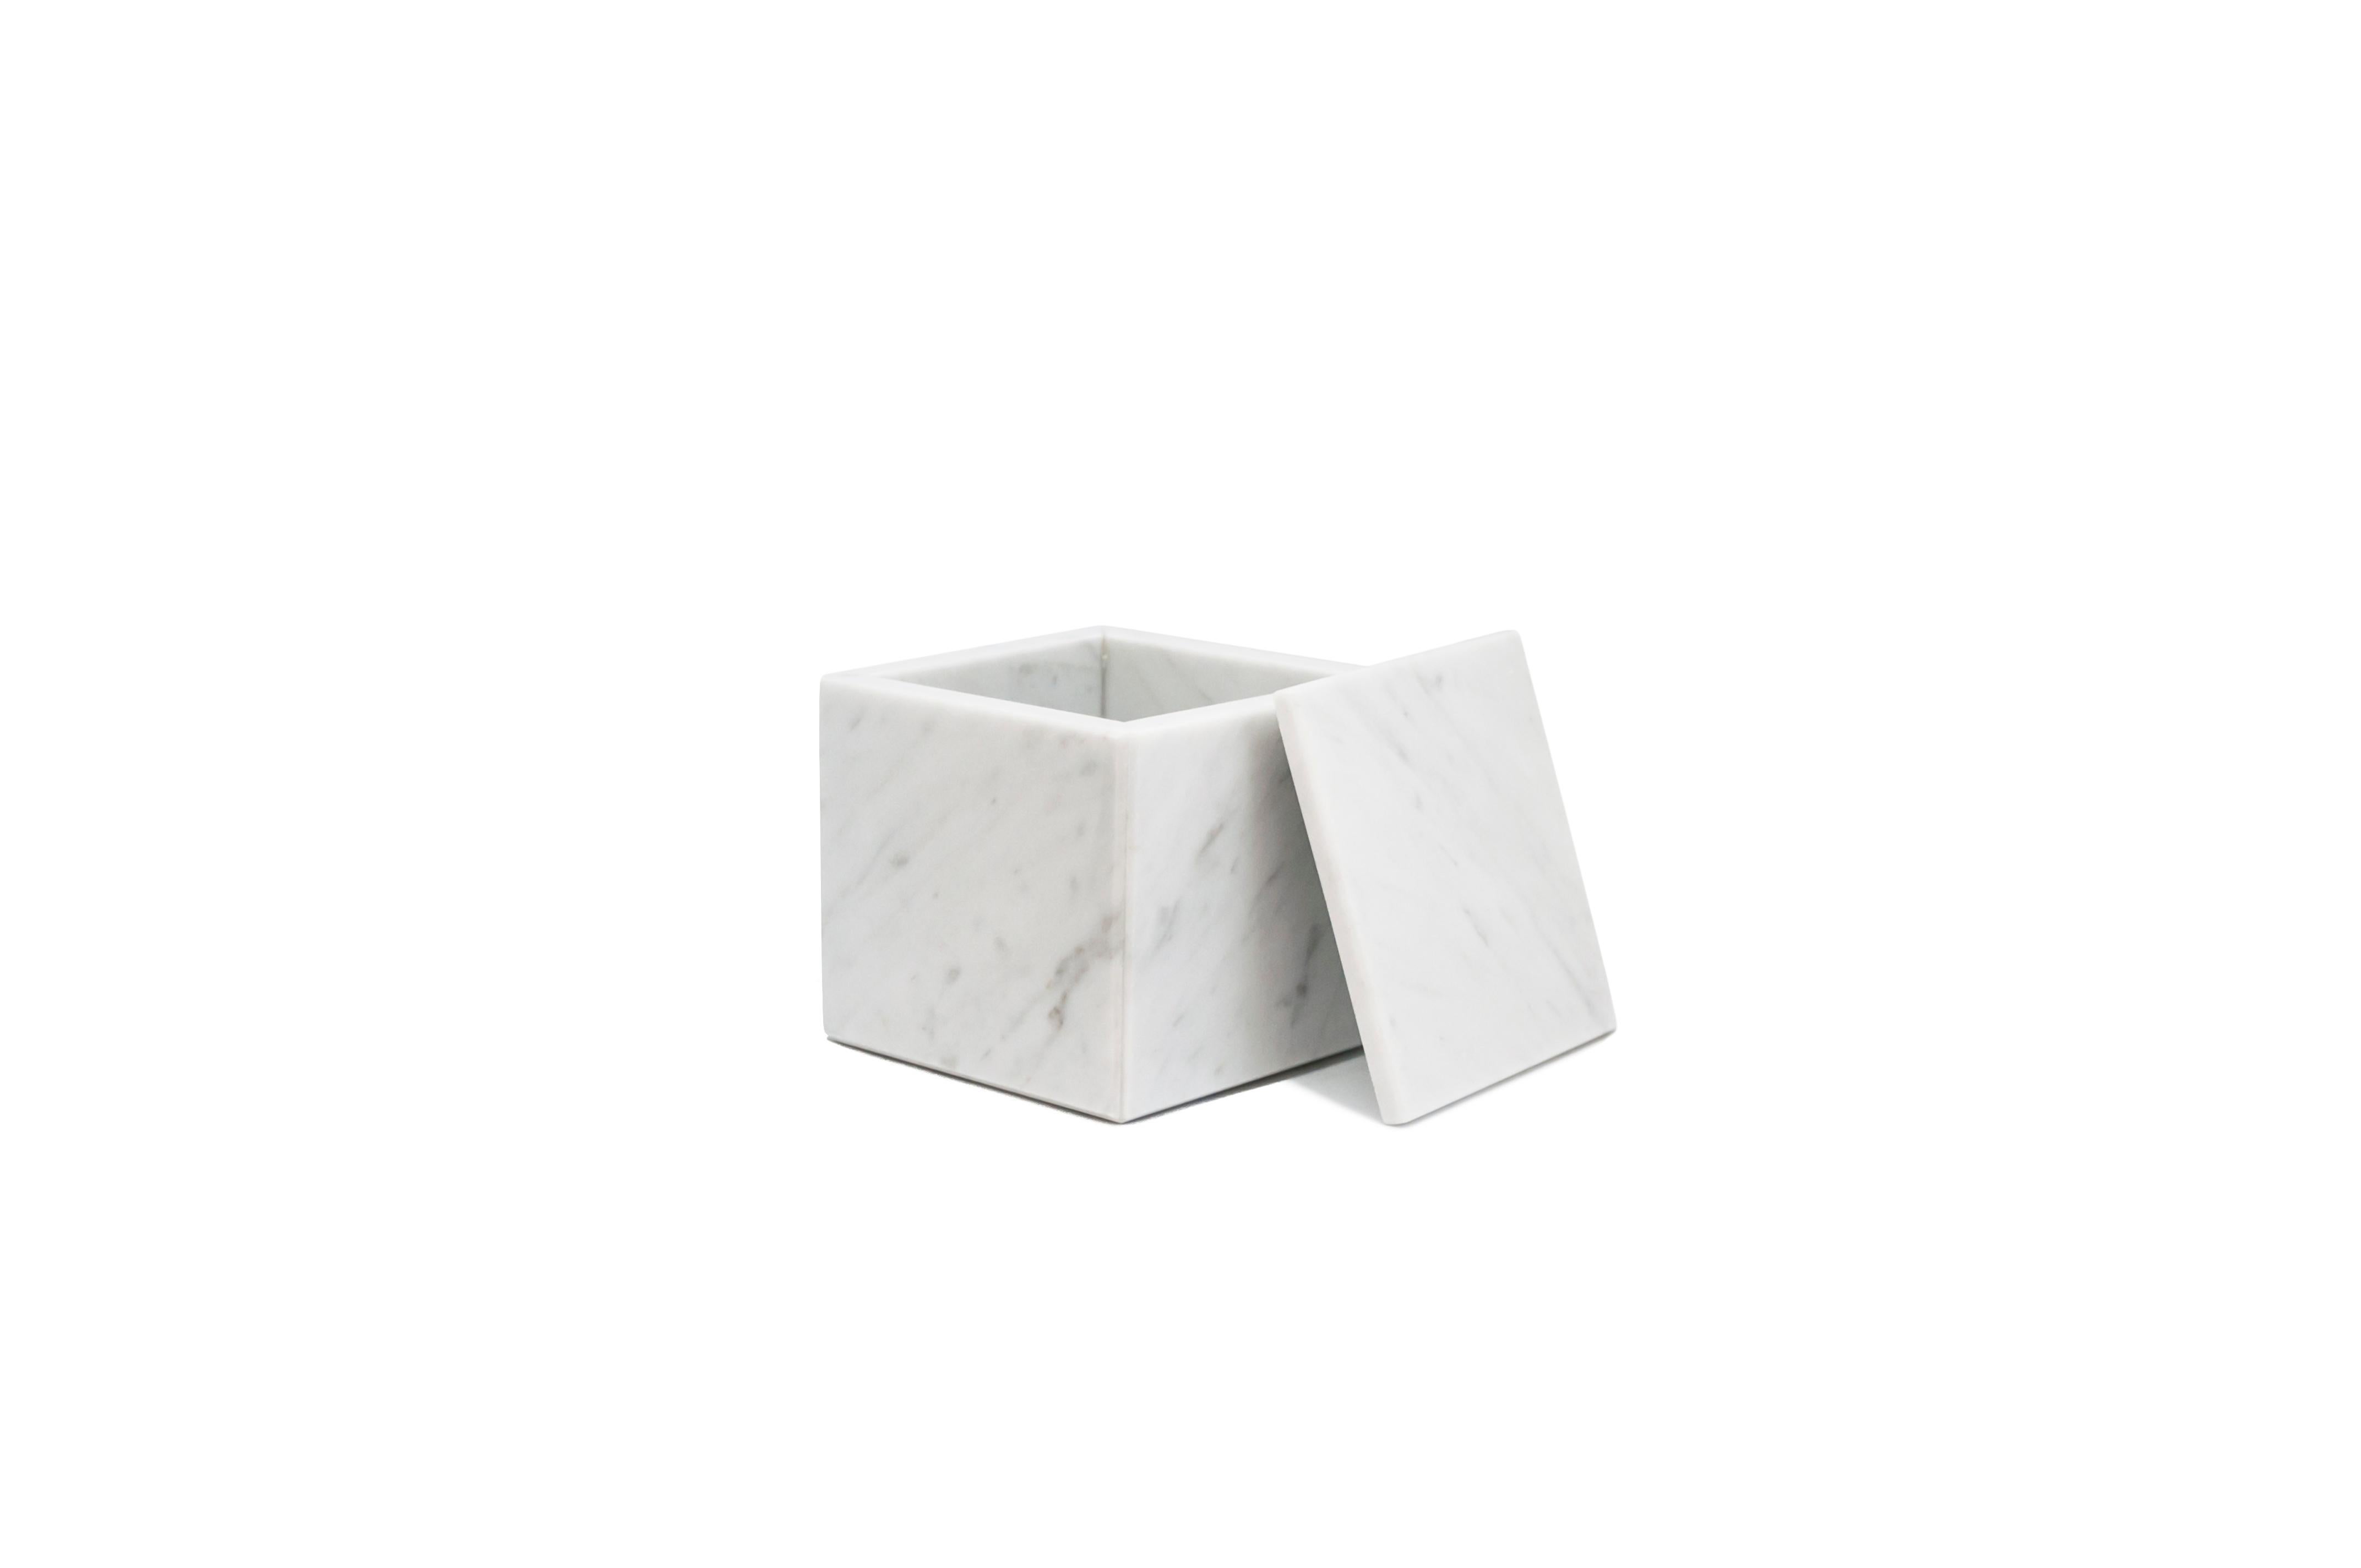 Squared white Carrara marble box with lid.
Each piece is in a way unique (since each marble block is different in veins and shades) and handcrafted in Italy. Slight variations in shape, color and size are to be considered a guarantee of an